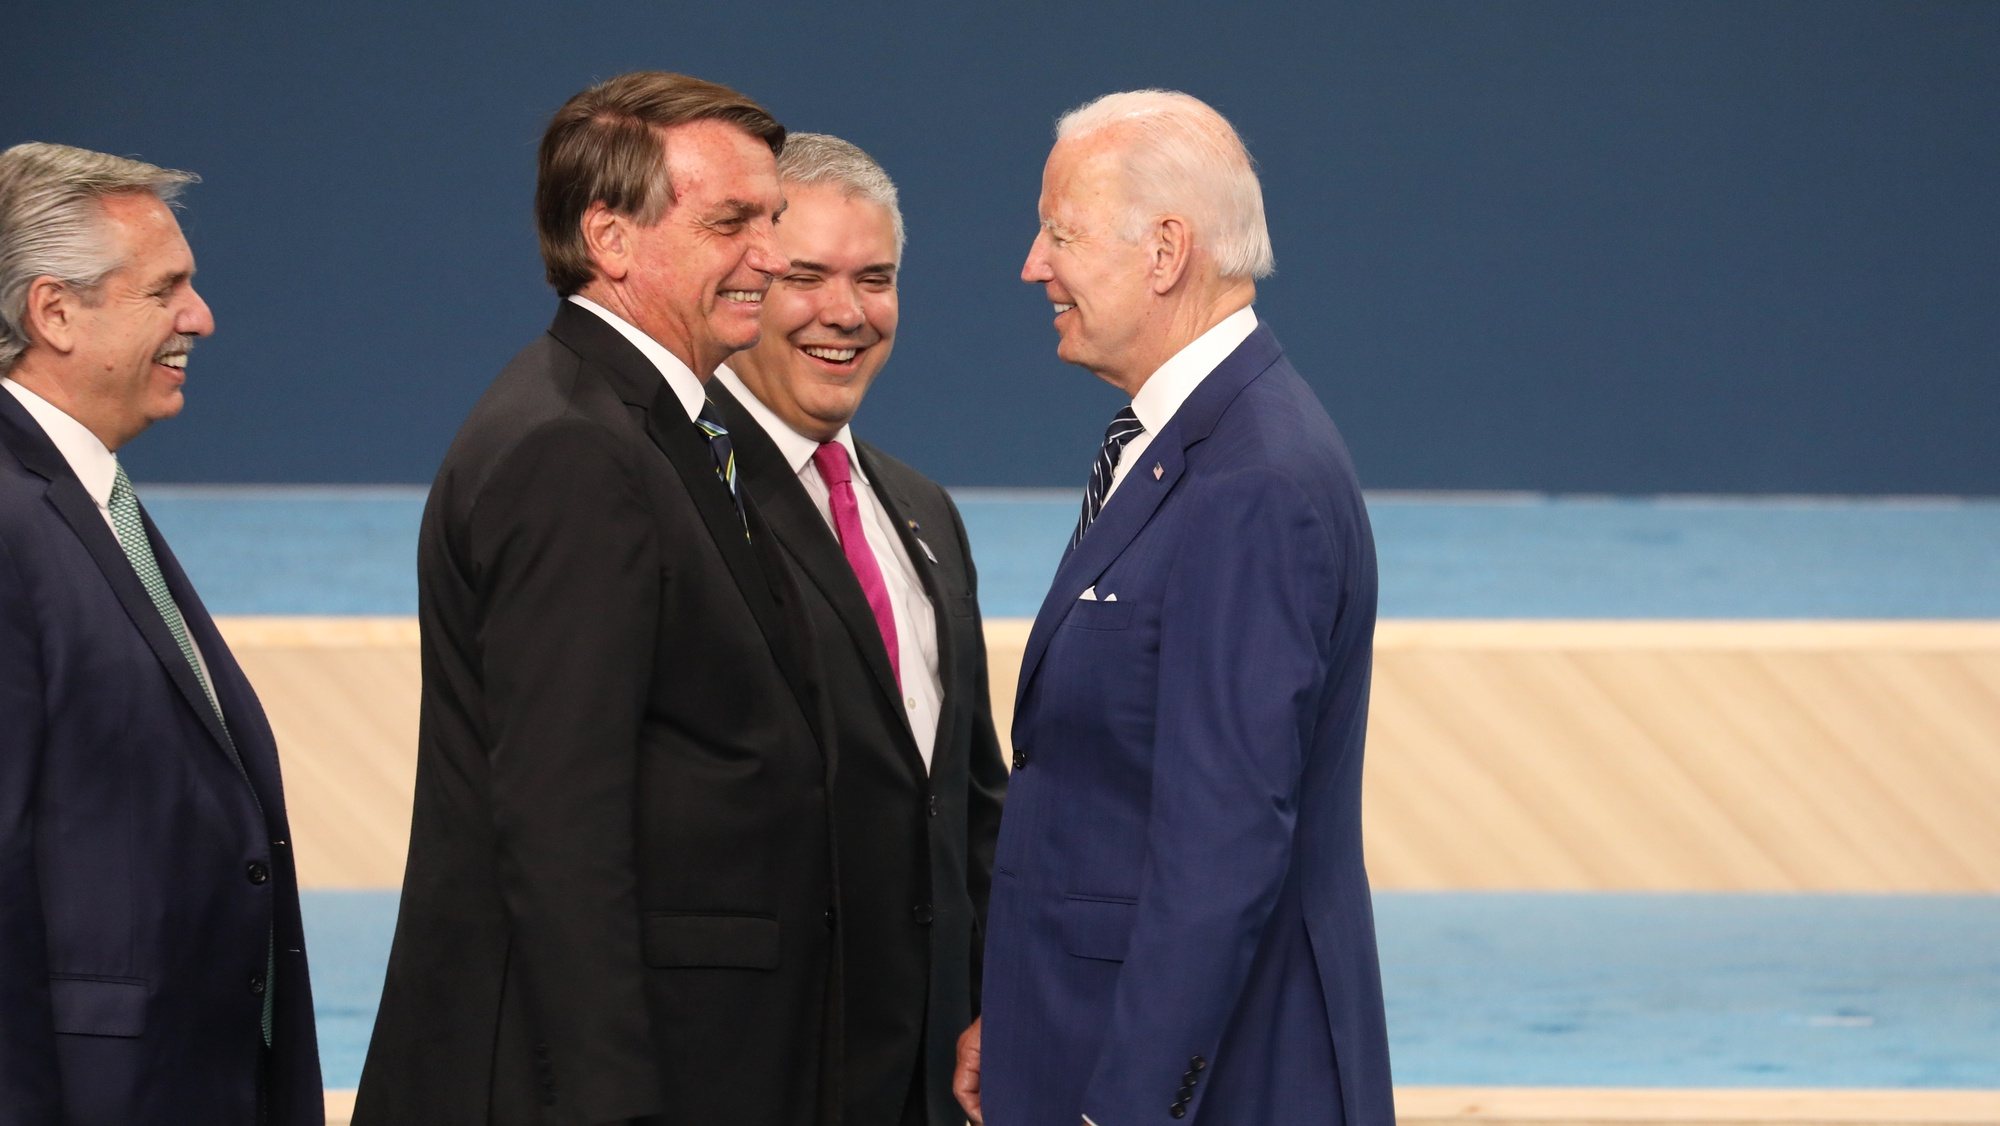 epa10006854 US President Joe Biden (R), and Brasilian President Jair Bolsonaro (2-L), greet each other after they took part in a &#039;Family Photo&#039; at the IX Summit of the Americas in Los Angeles, California, USA, 10 June 2022.  EPA/DAVID SWANSON / POOL